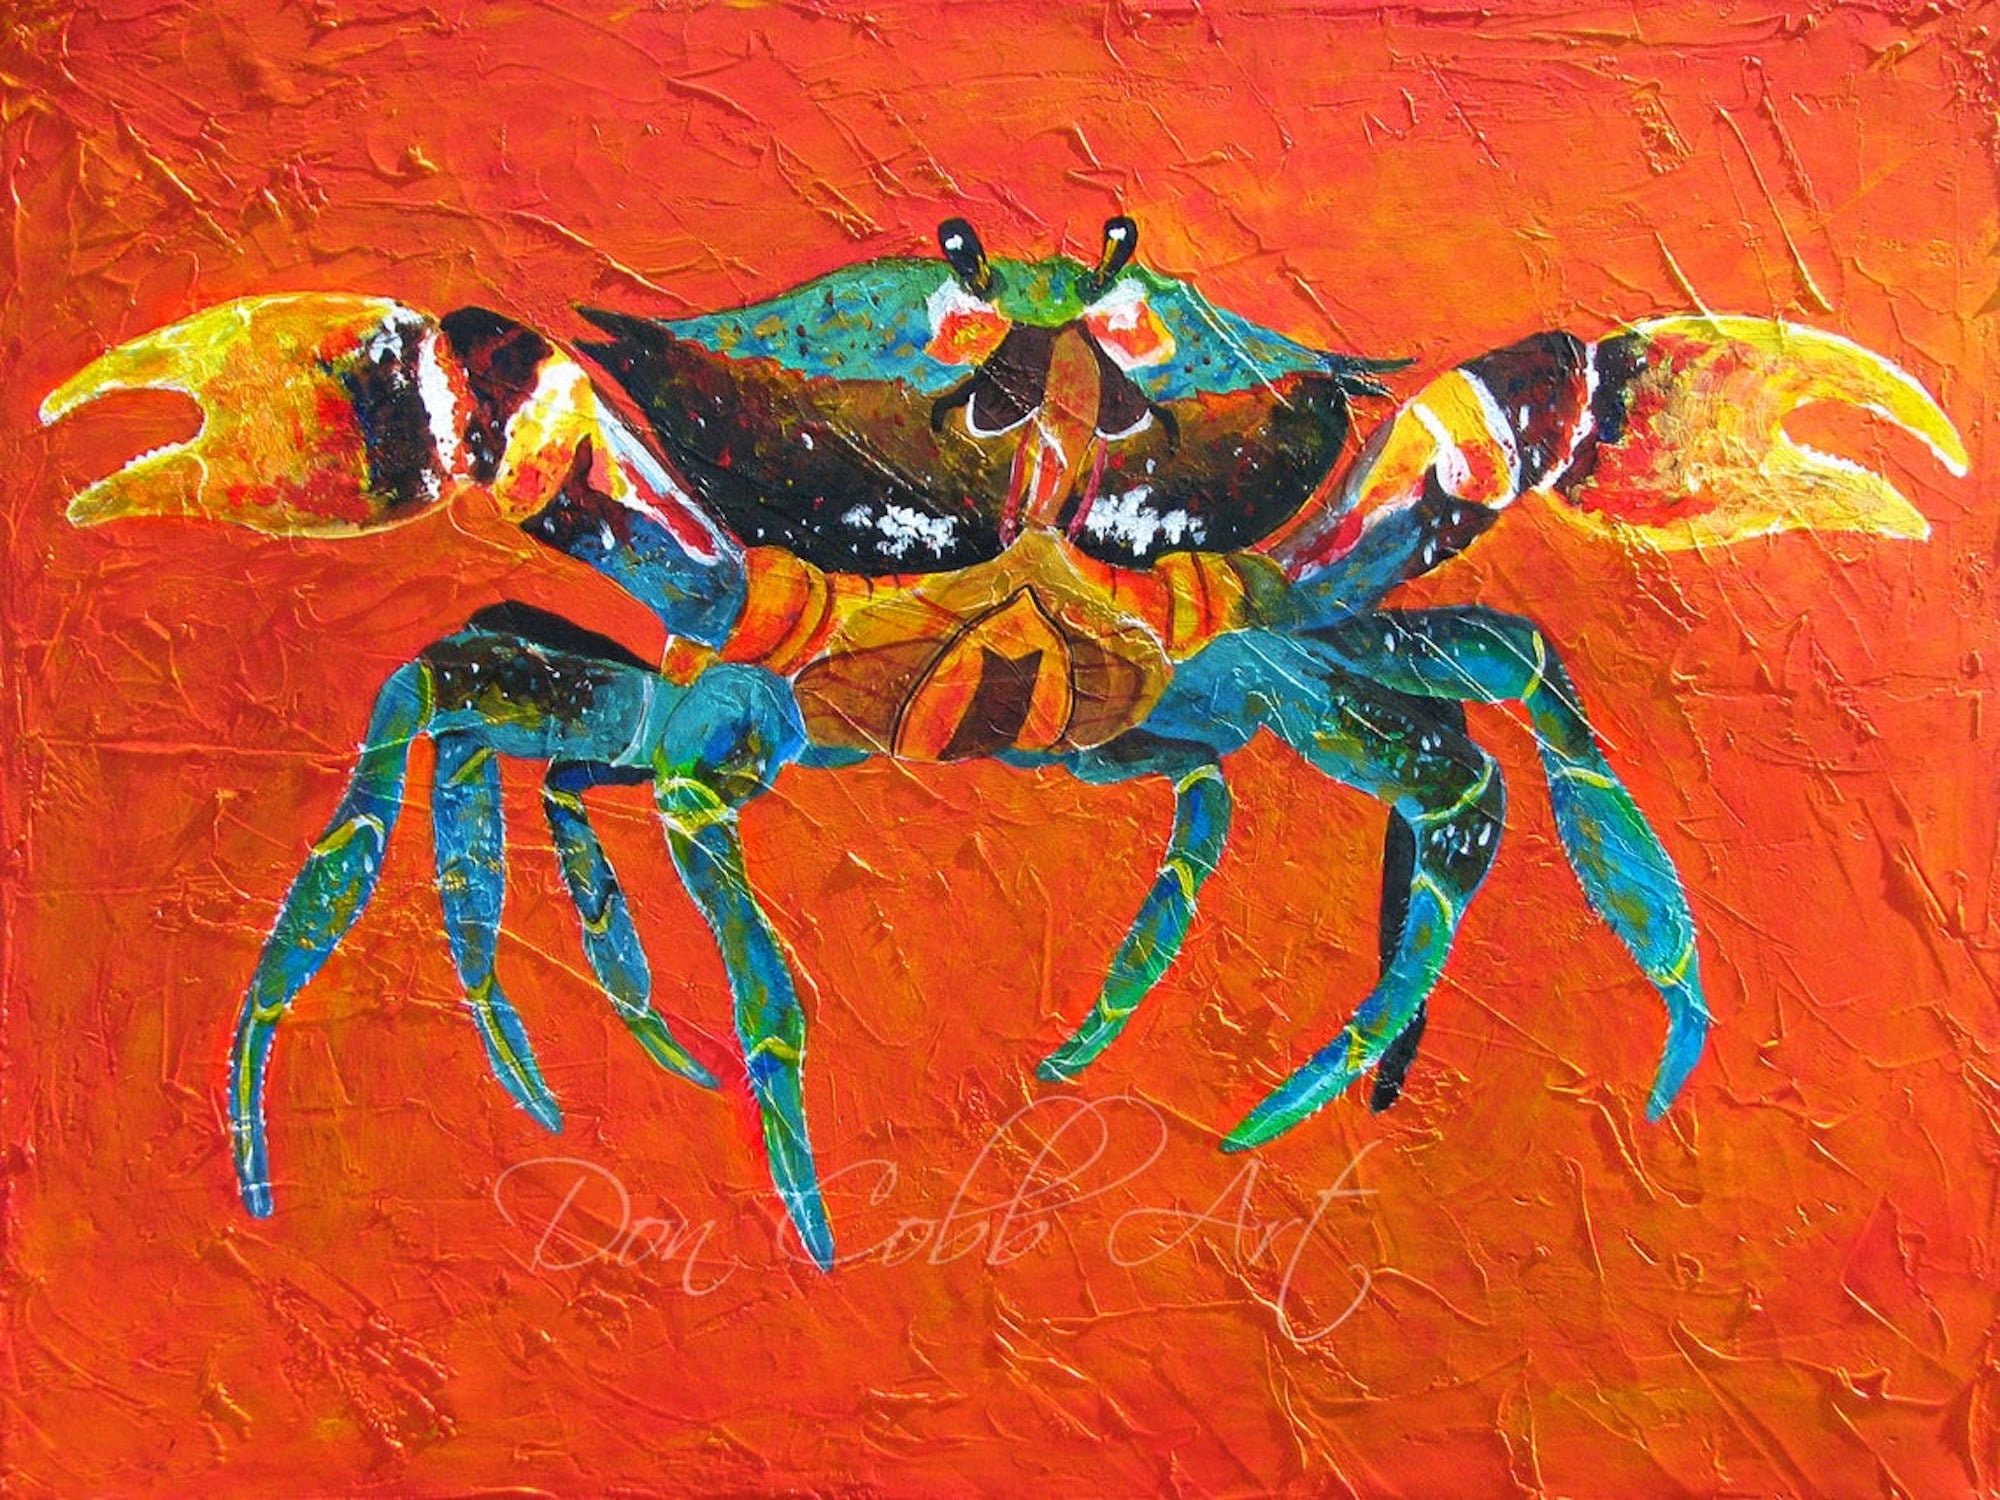 Maryland Seafood Blue Crab Art Angry Prints Signed & Numbered"